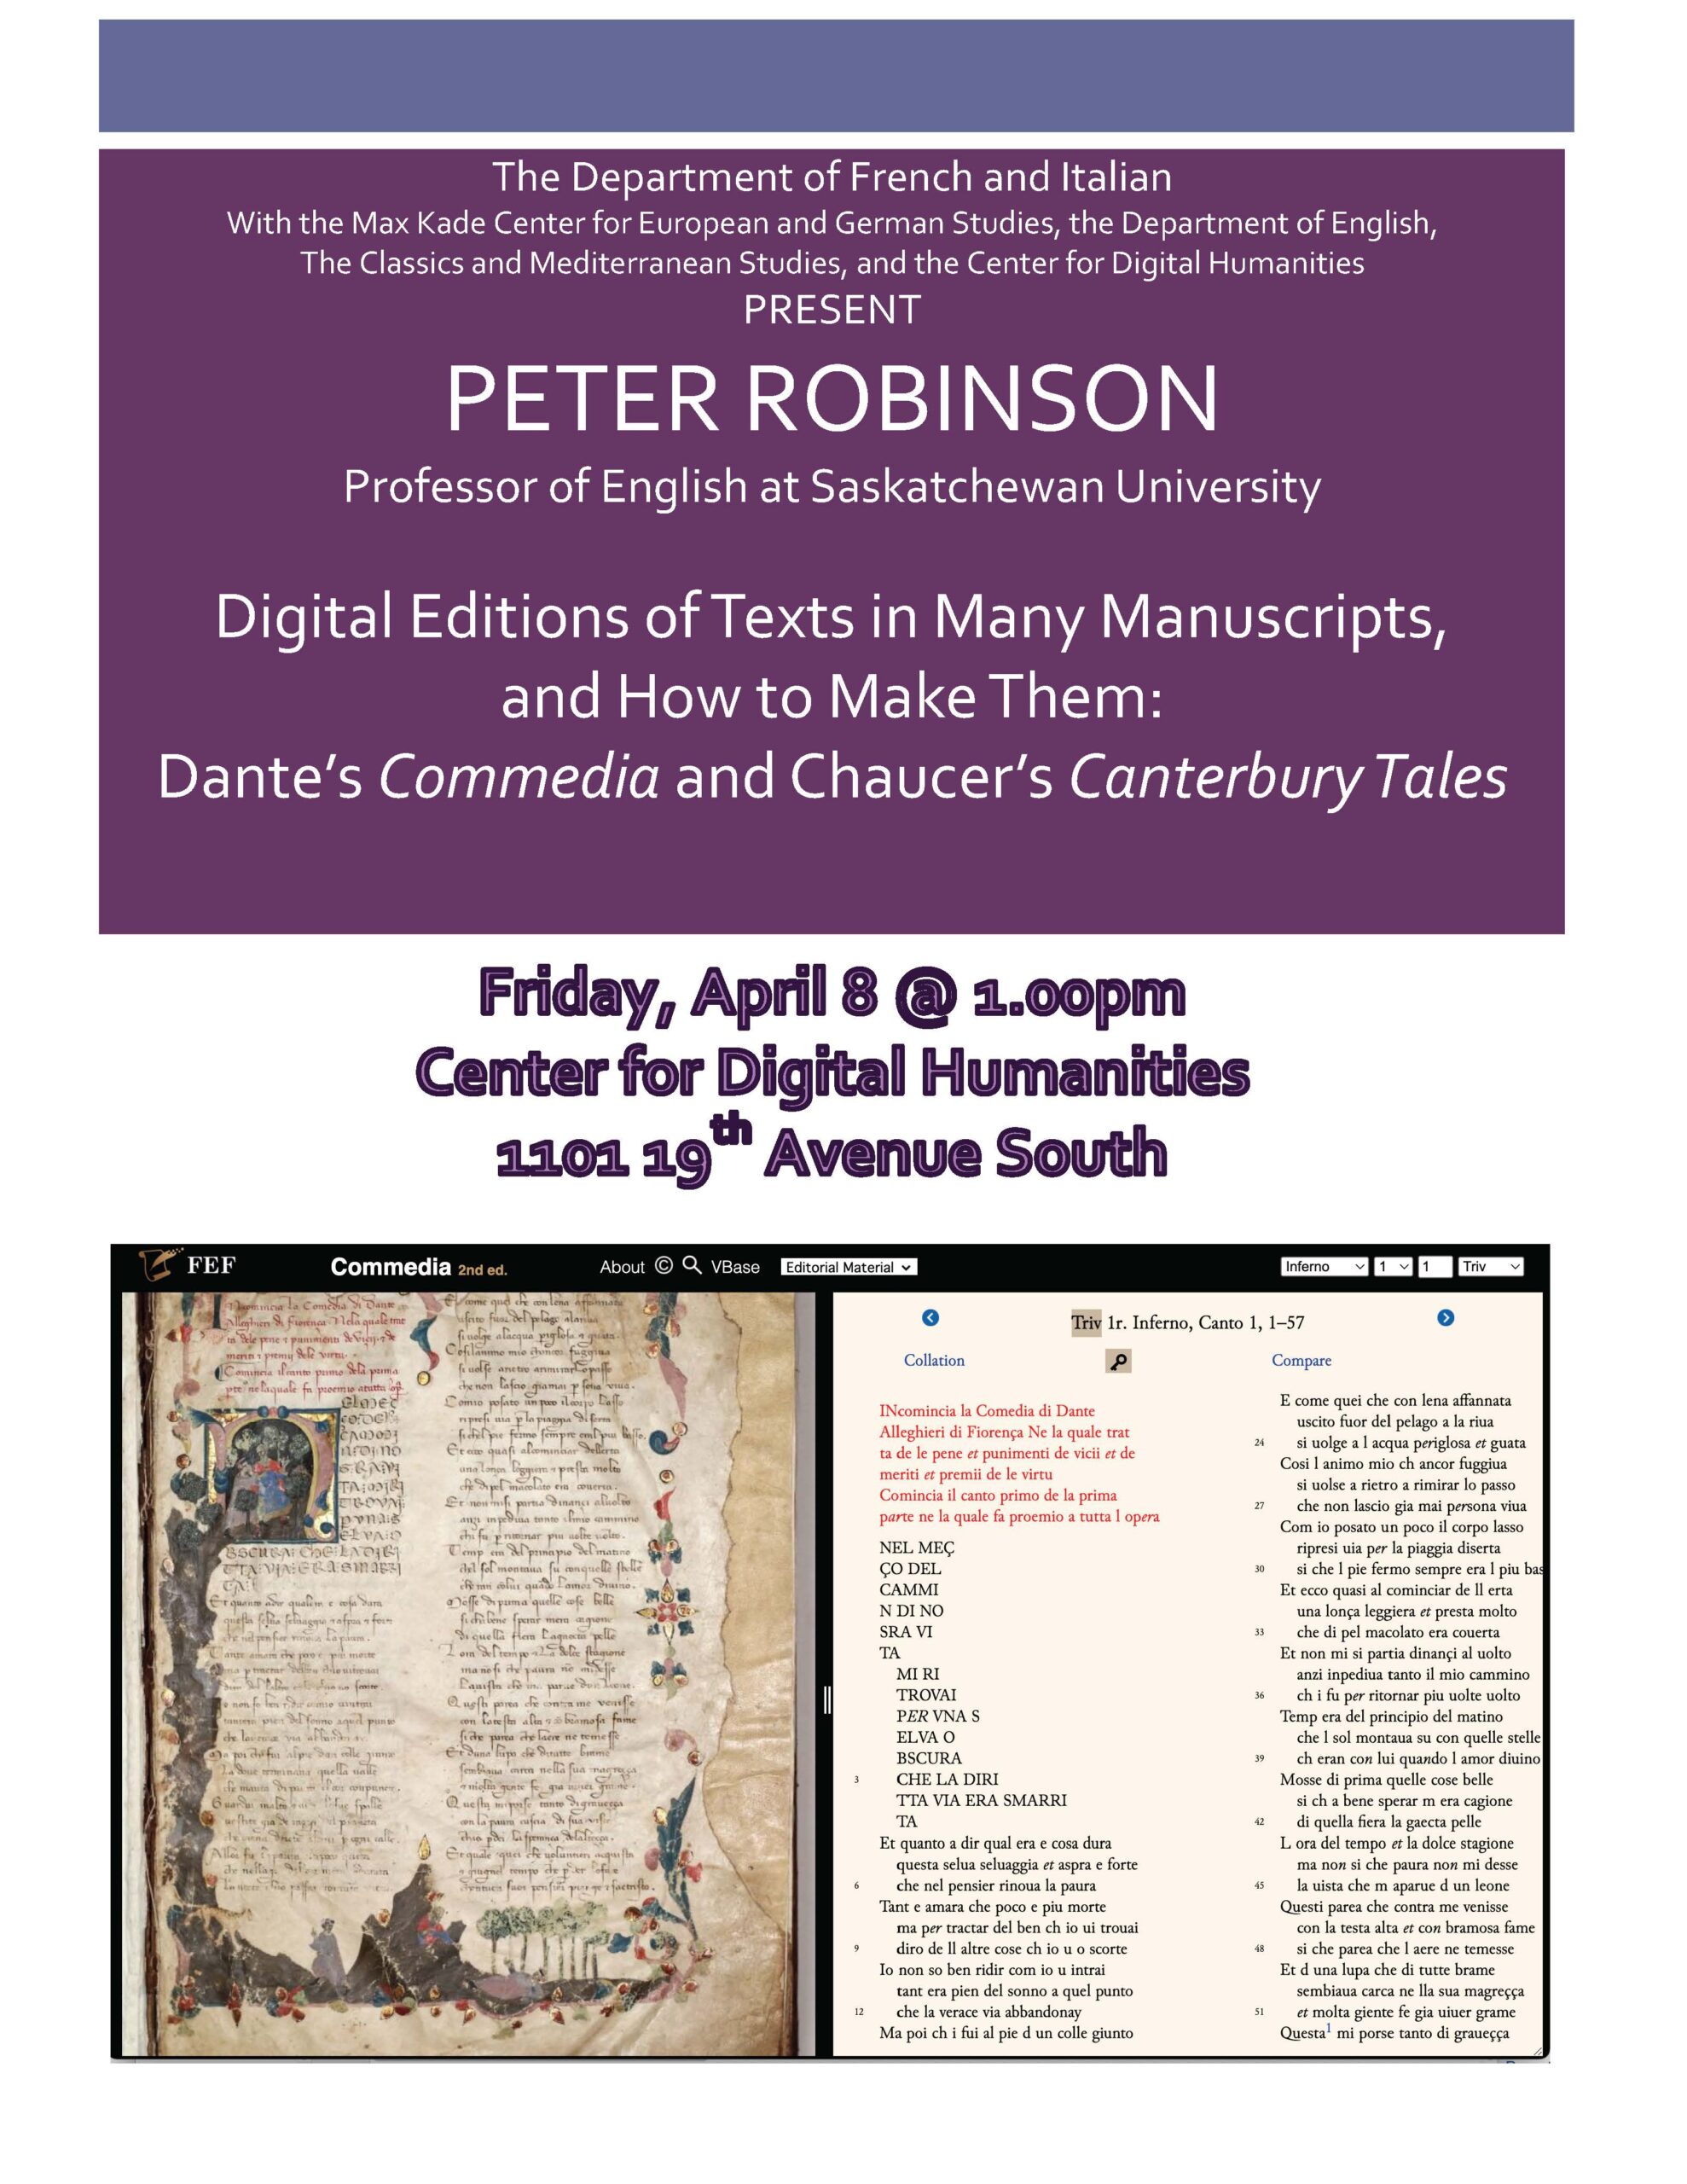 Peter Robinson Digital Editions of Texts in Many Manuscripts and How to Make Them